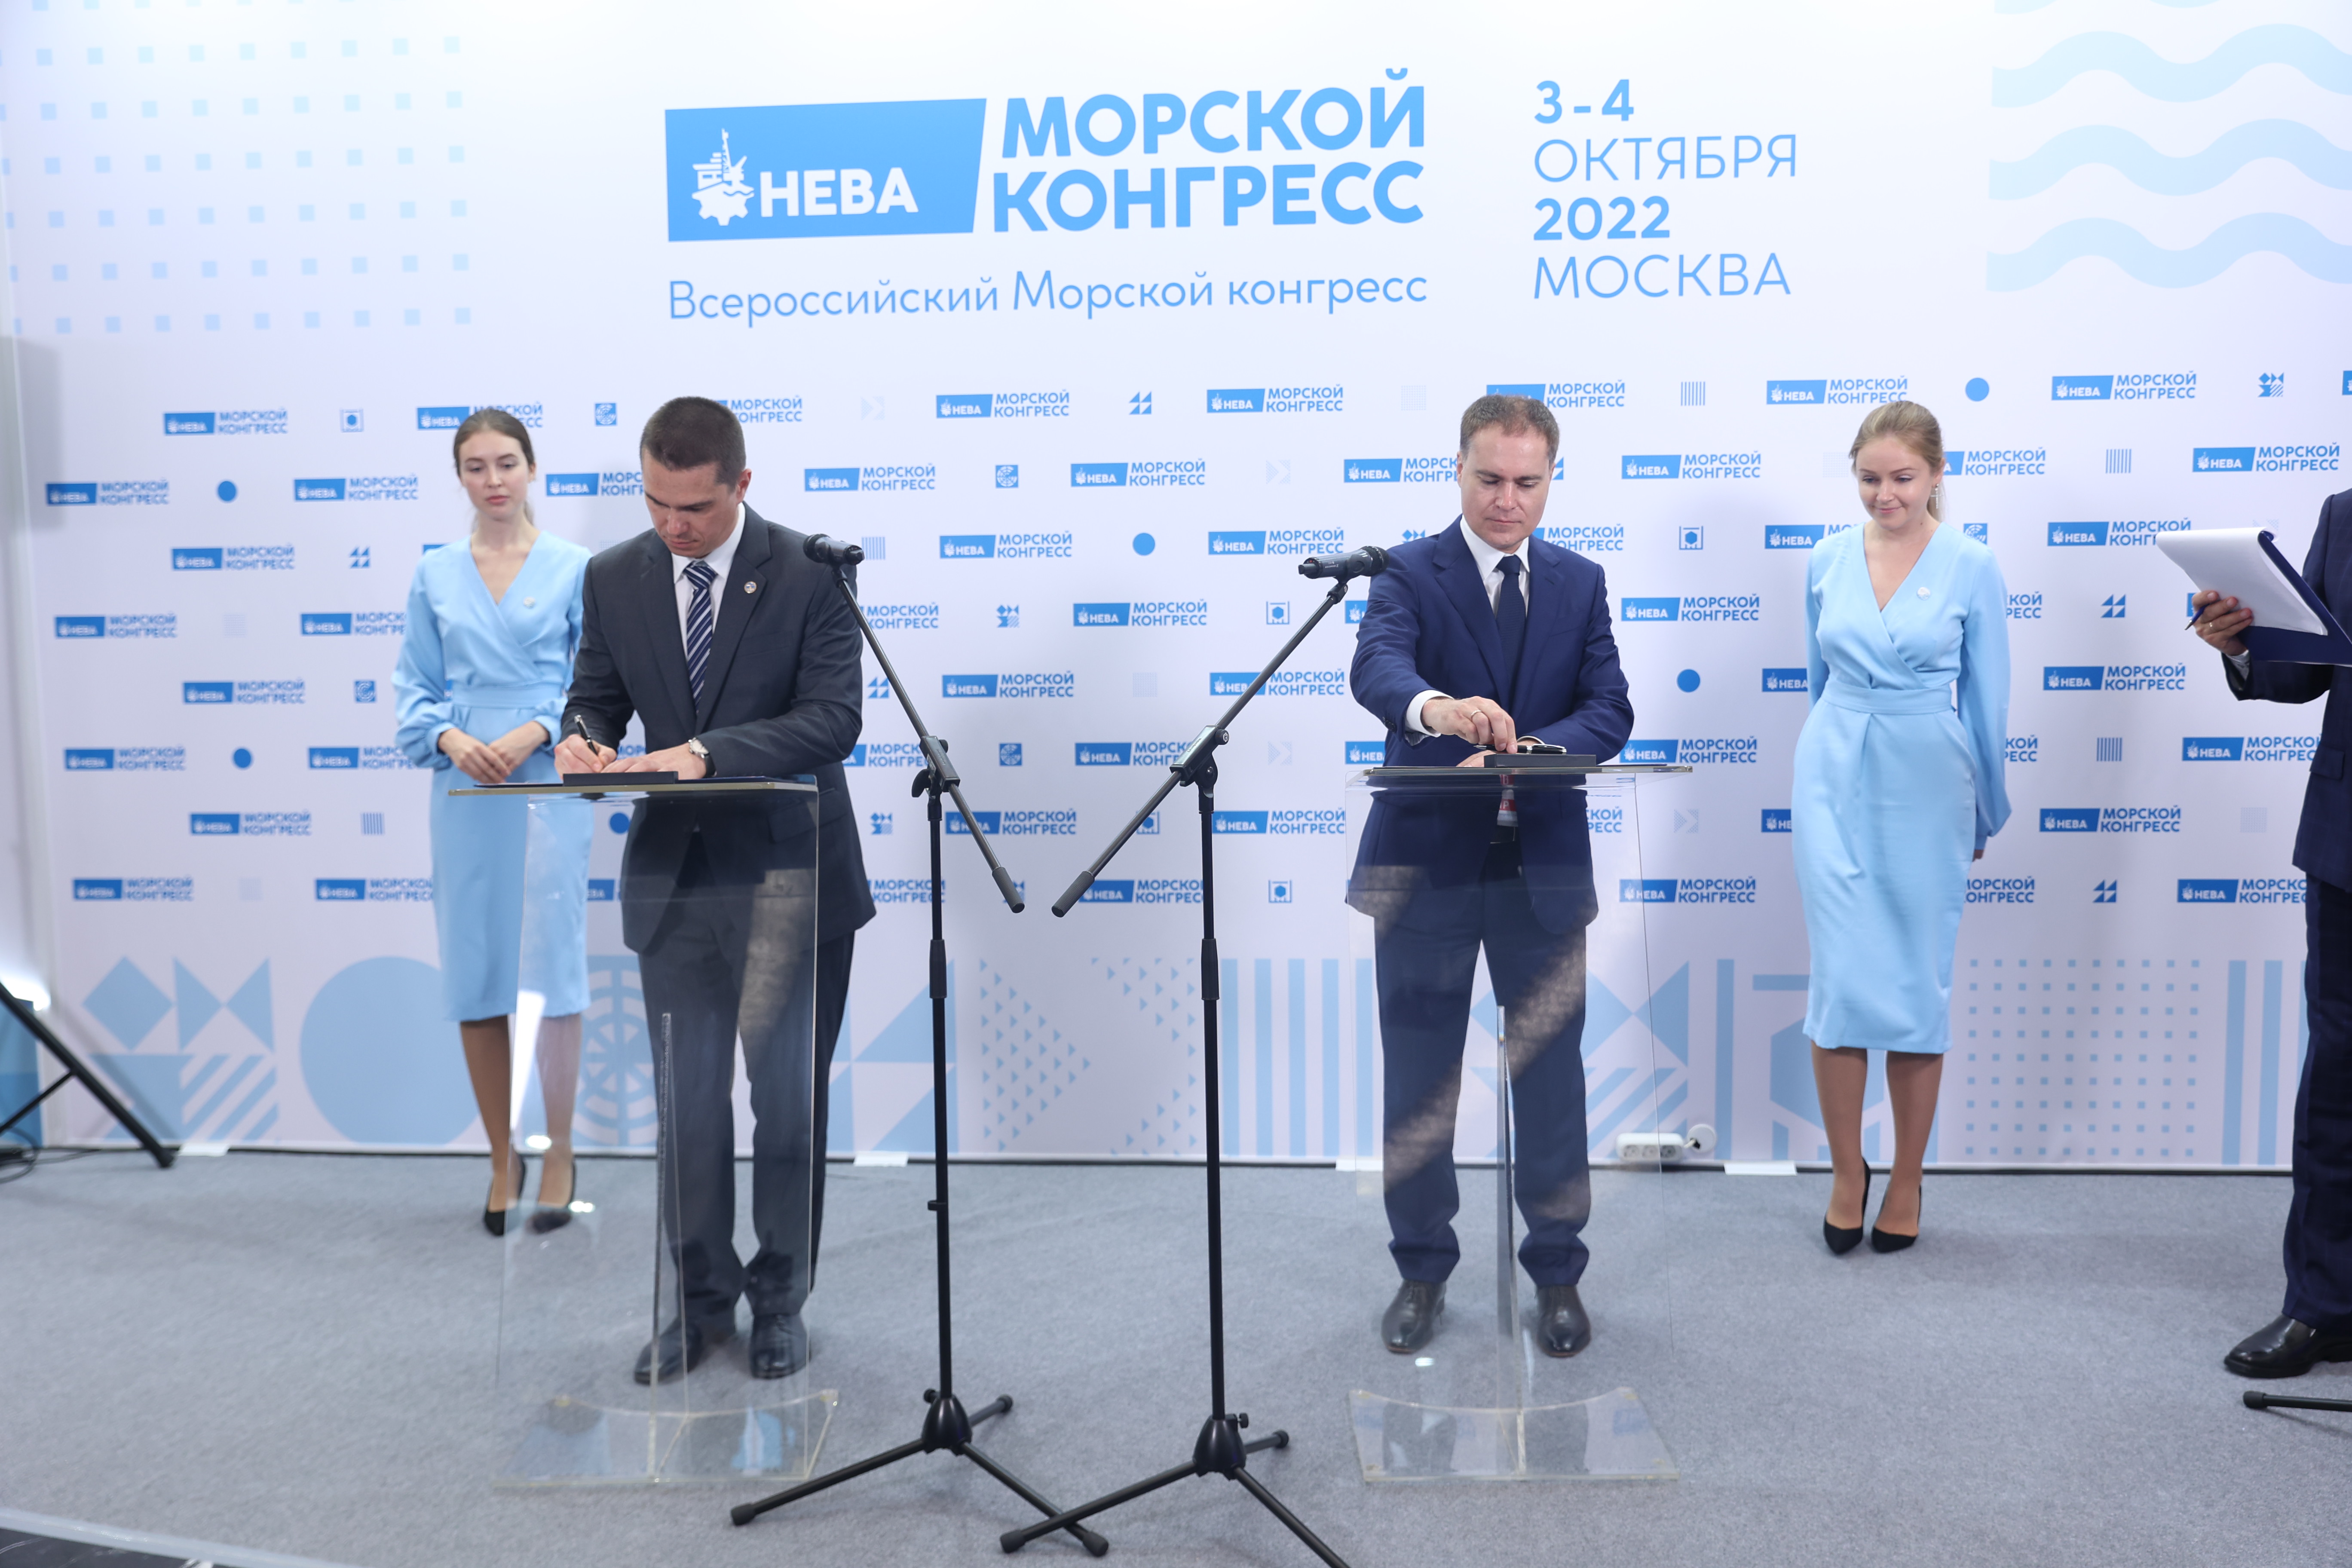 ROSATOM and MSU MRC signed an agreement on cooperation in the field of environmental monitoring in the Arctic in 2022-2023